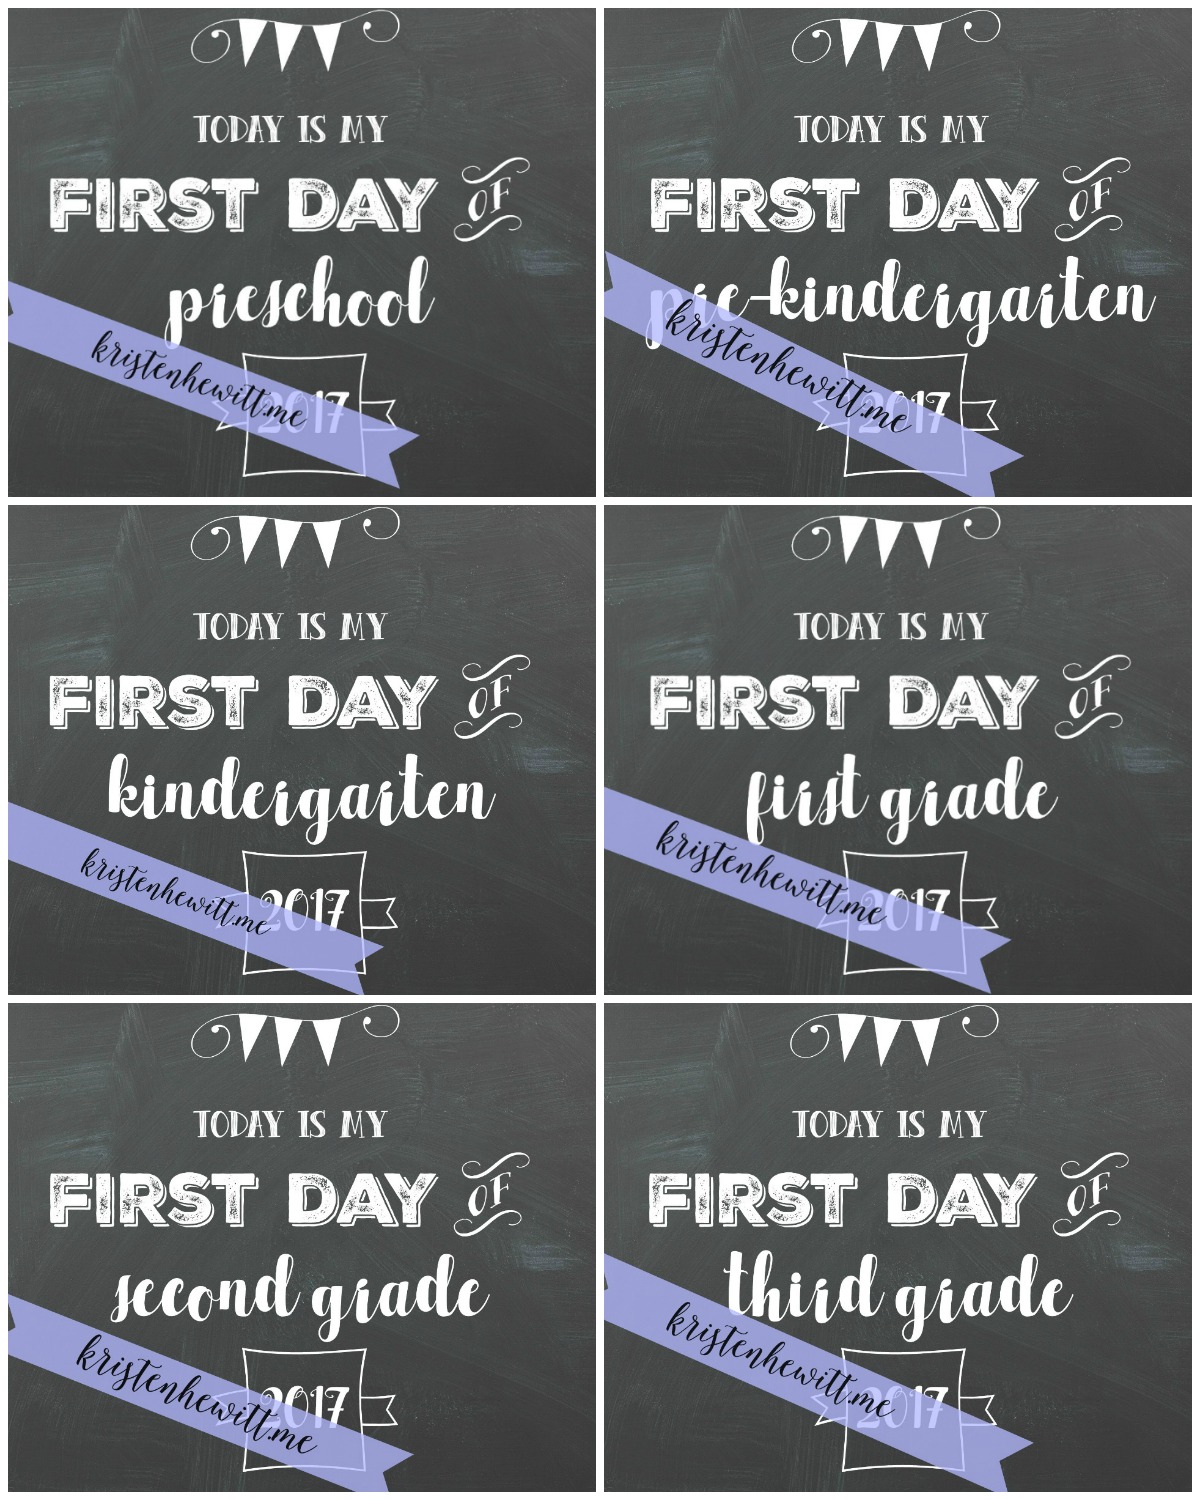 Looking for a free chalkboard printable for your child's first day of school? Print these out now, and have them hold it, or even frame it! Cute huh?!